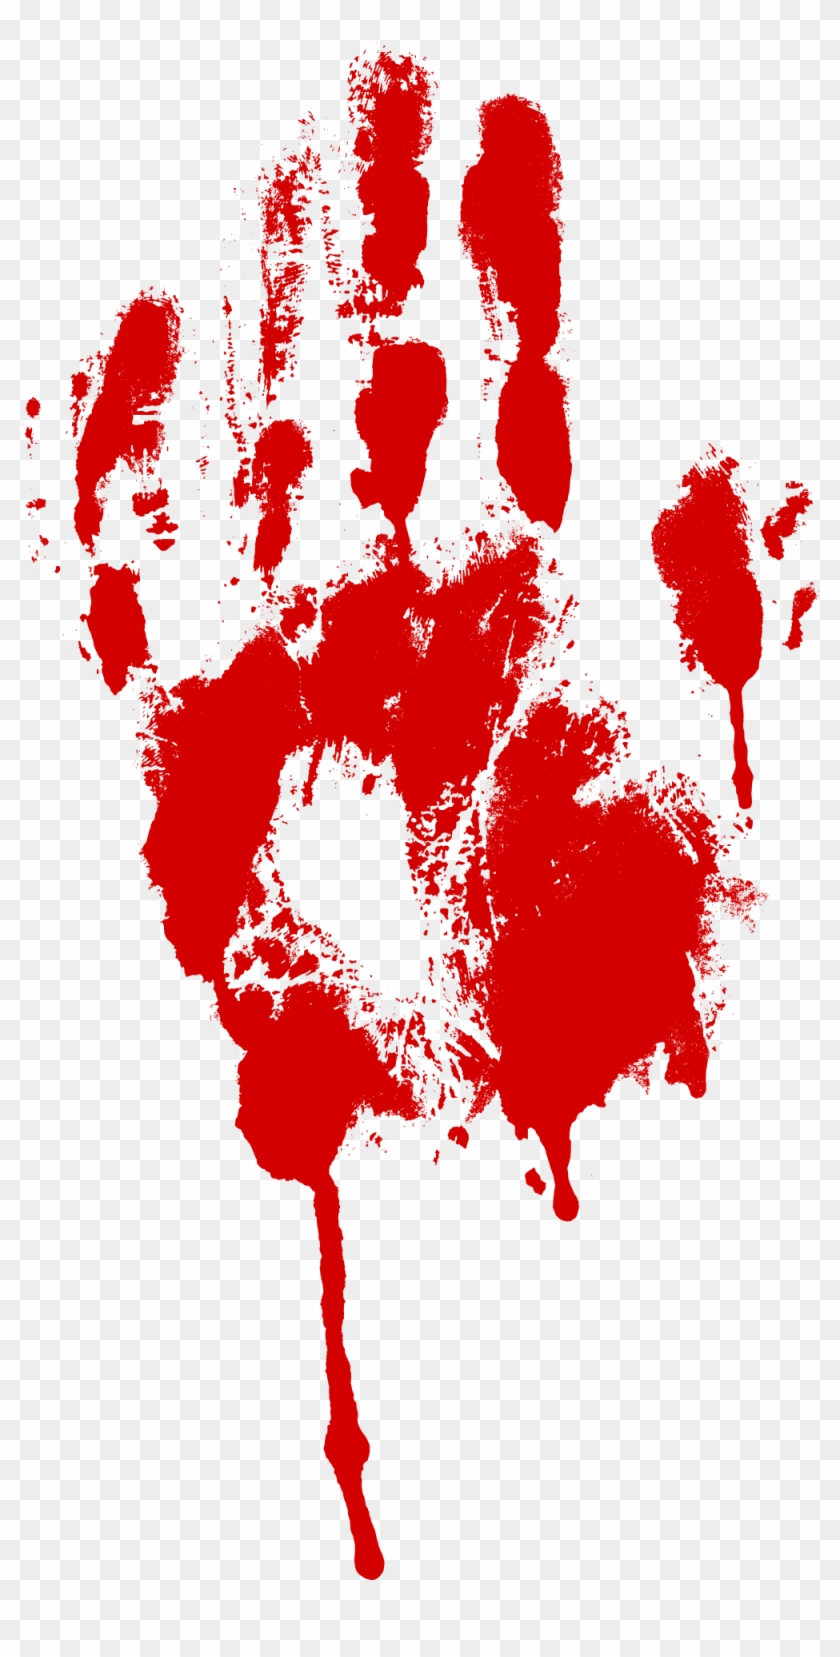 Free Download - Bloody Handprint Blood Hand Png #475700